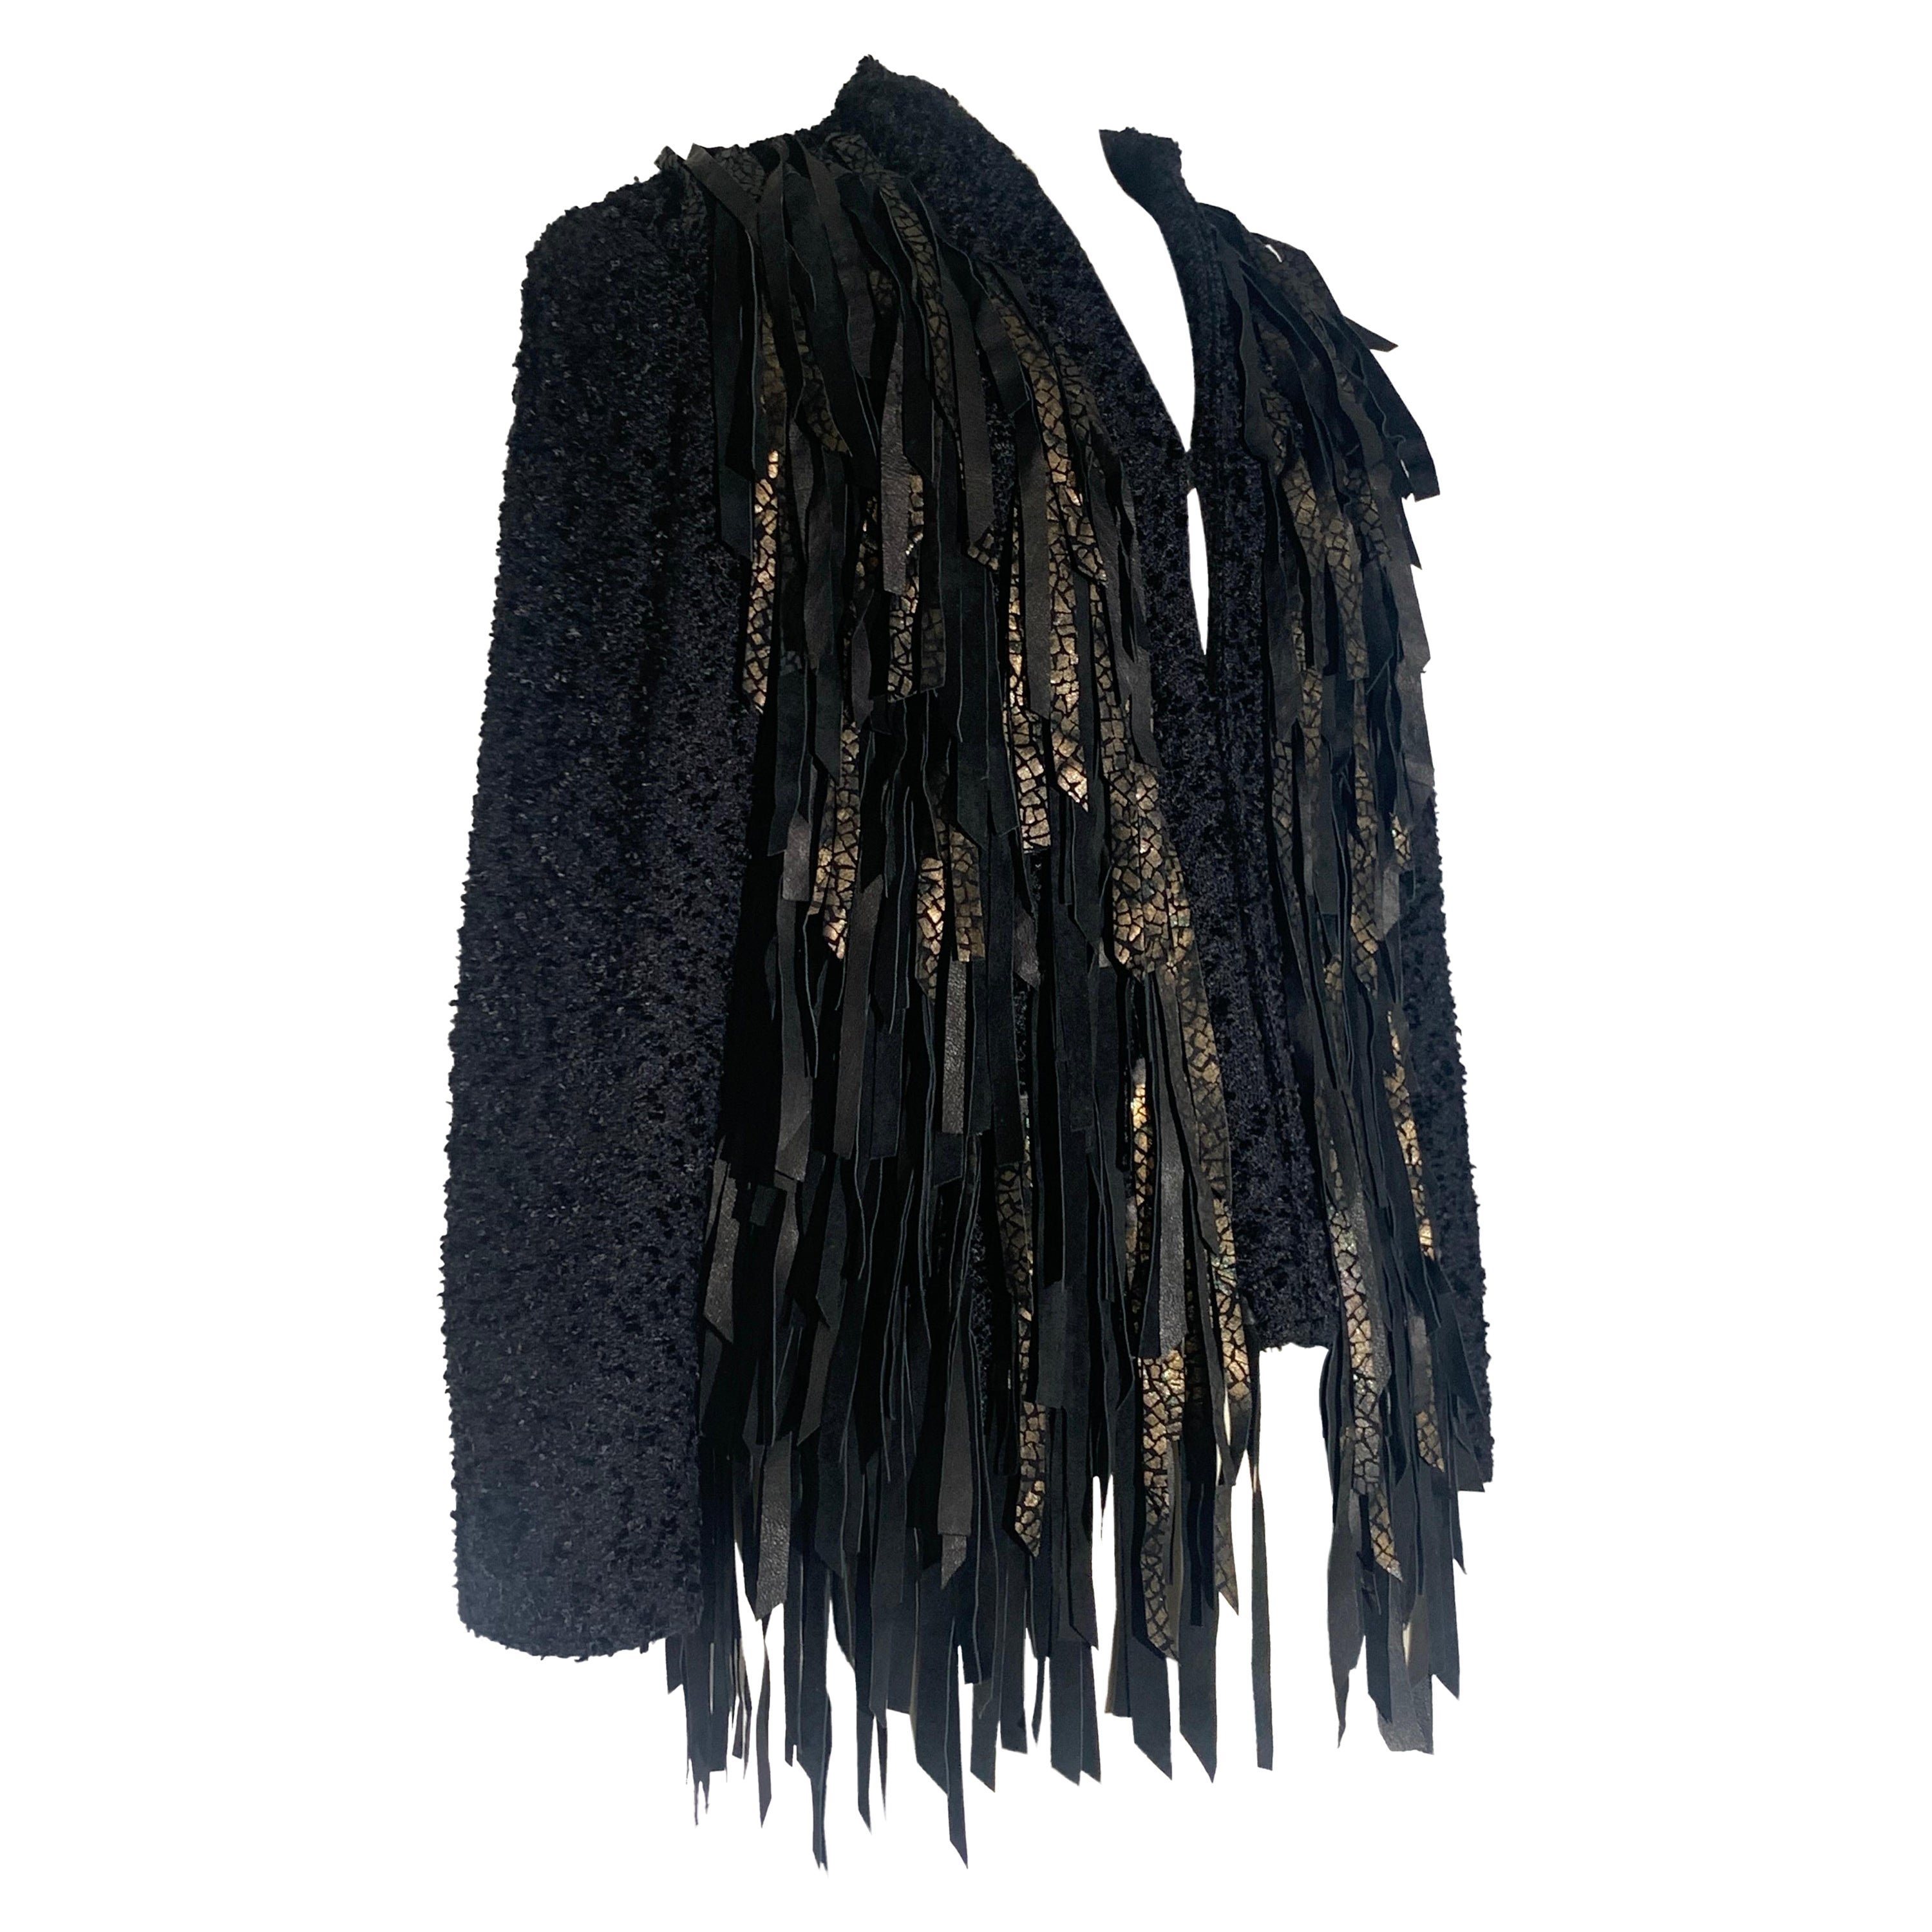 Western-Inspired Art-To-Wear Handwoven Black Boucle & Suede Fringed Jacket  For Sale